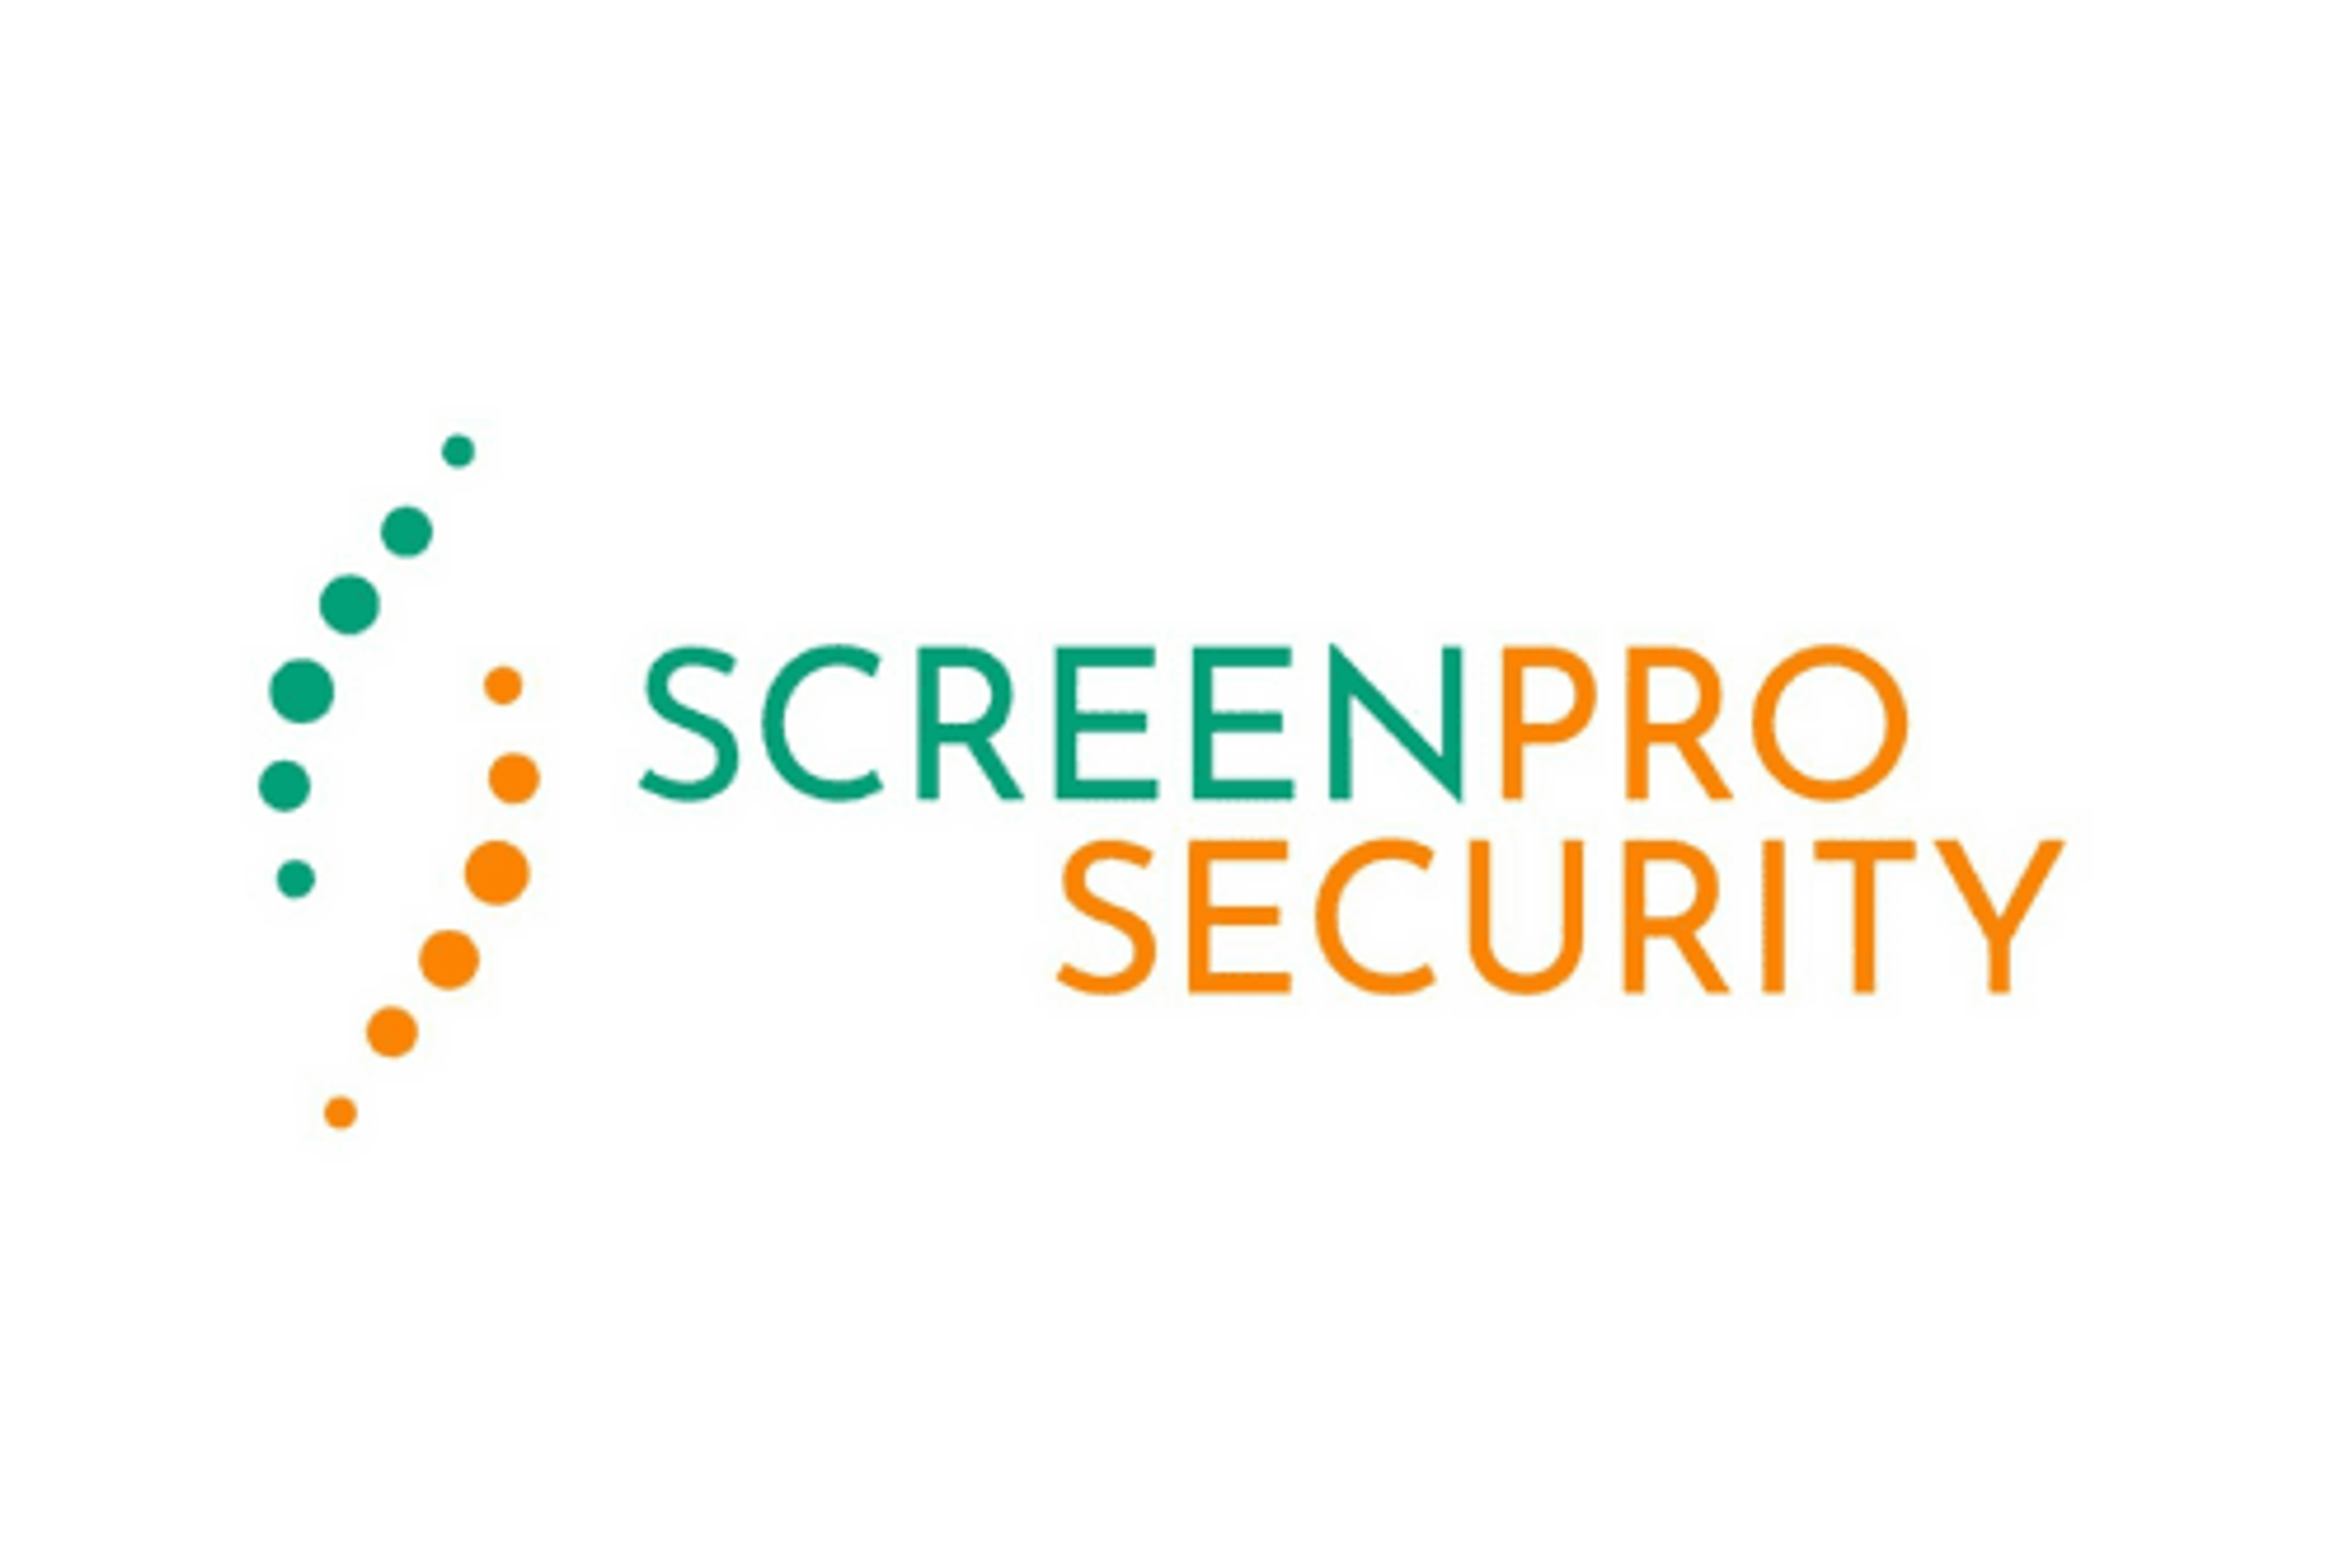 ScreenPro Building Cash Position With Continued Growth In Covid Testing Numbers